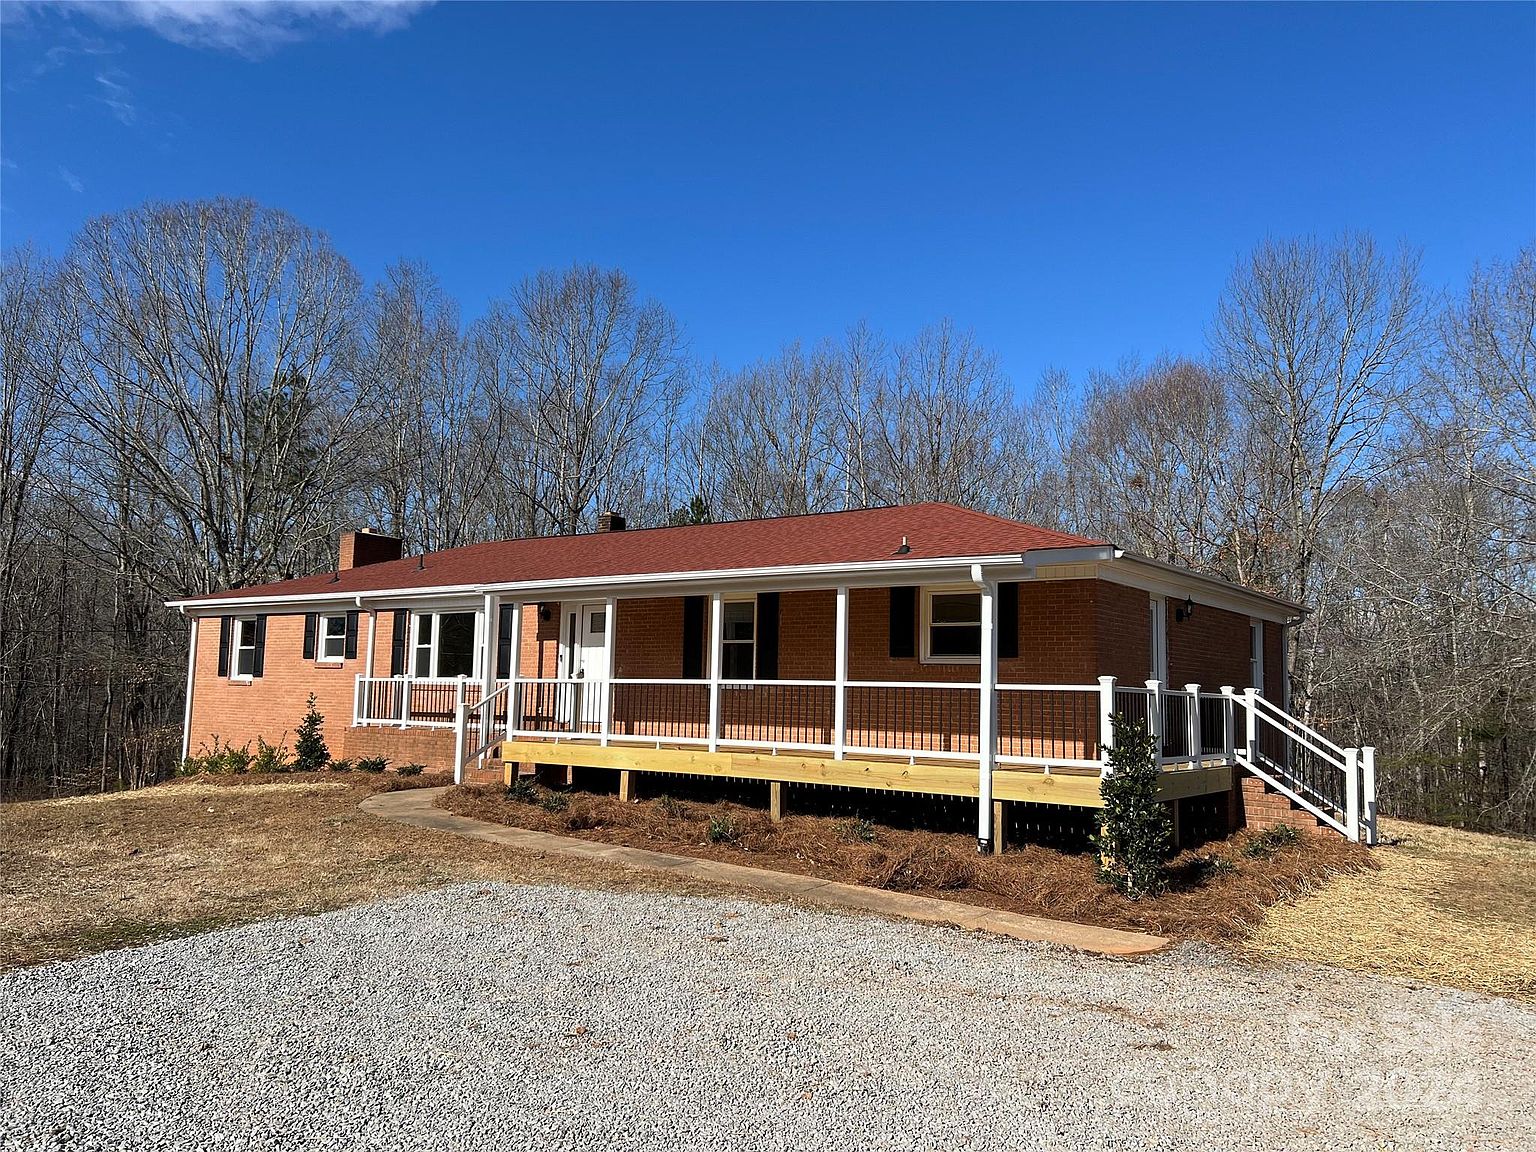 128 Alex D Owens Dr, Kings Mountain, NC 28086 | MLS #4102301 | Zillow